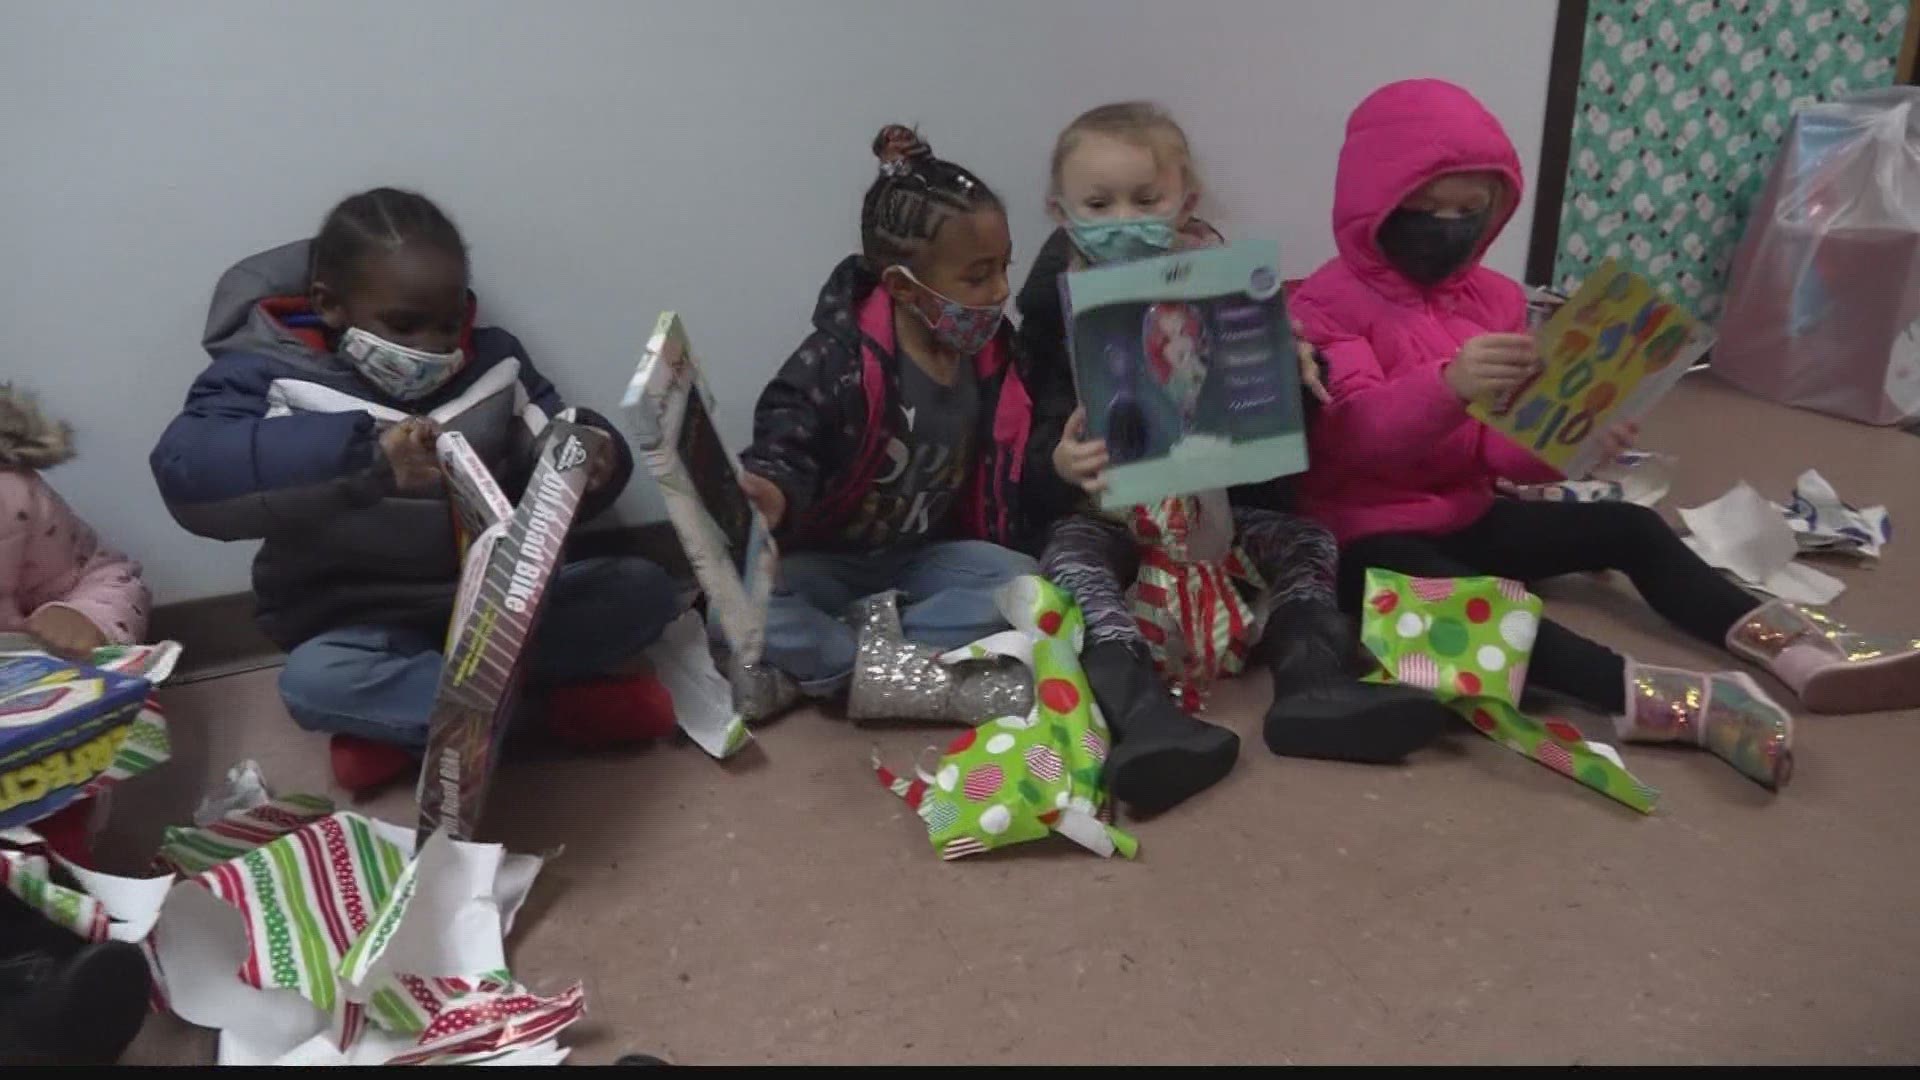 There was excitement at a local YMCA on Wednesday as HEMSI dropped off presents for local kids.